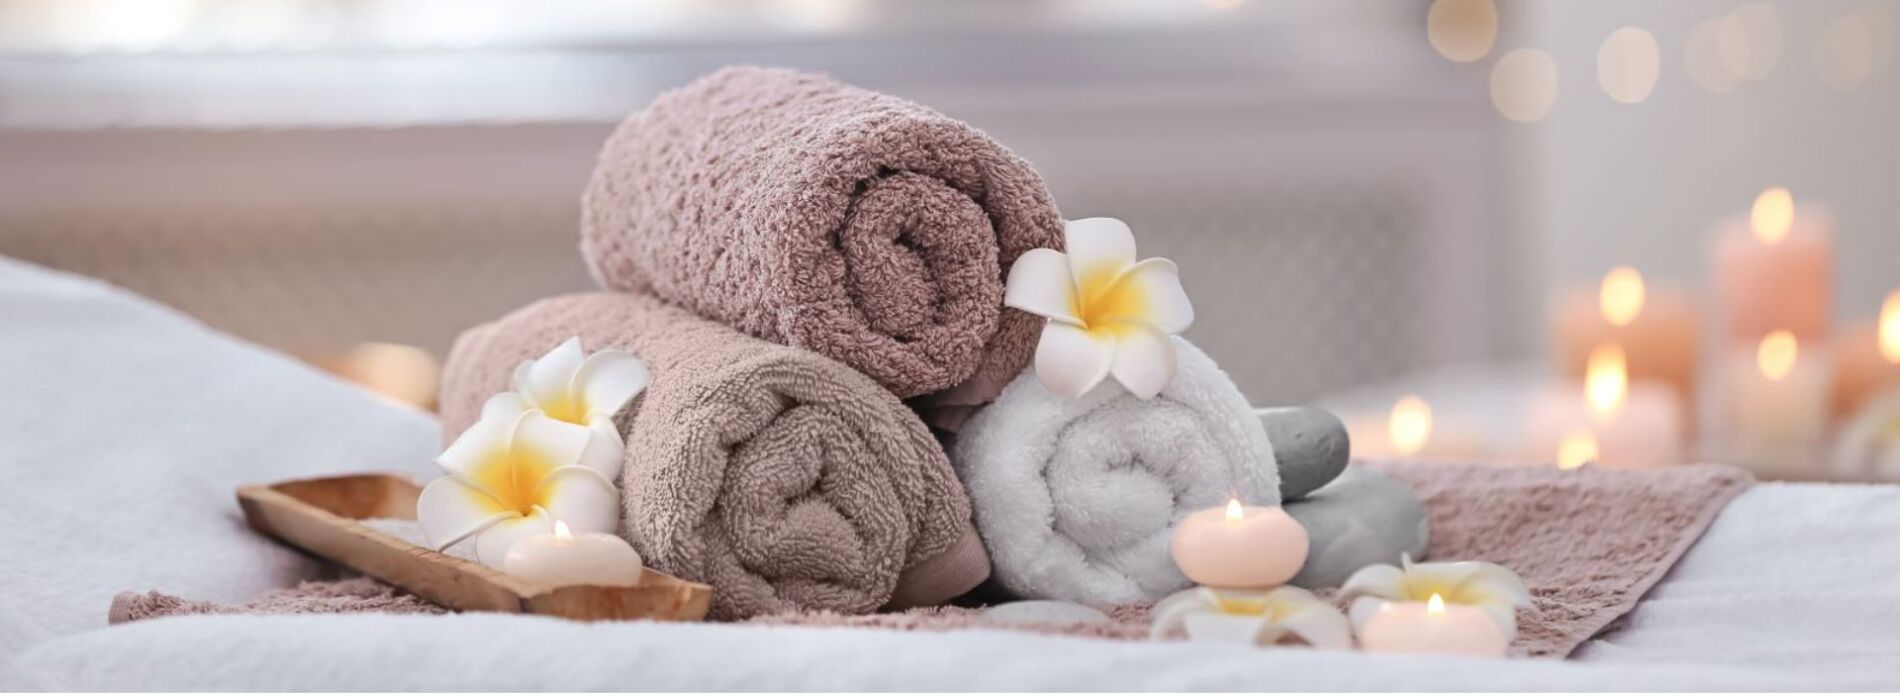 Fully Rejuvenate With an Anna Maria Island Spa Feature Image